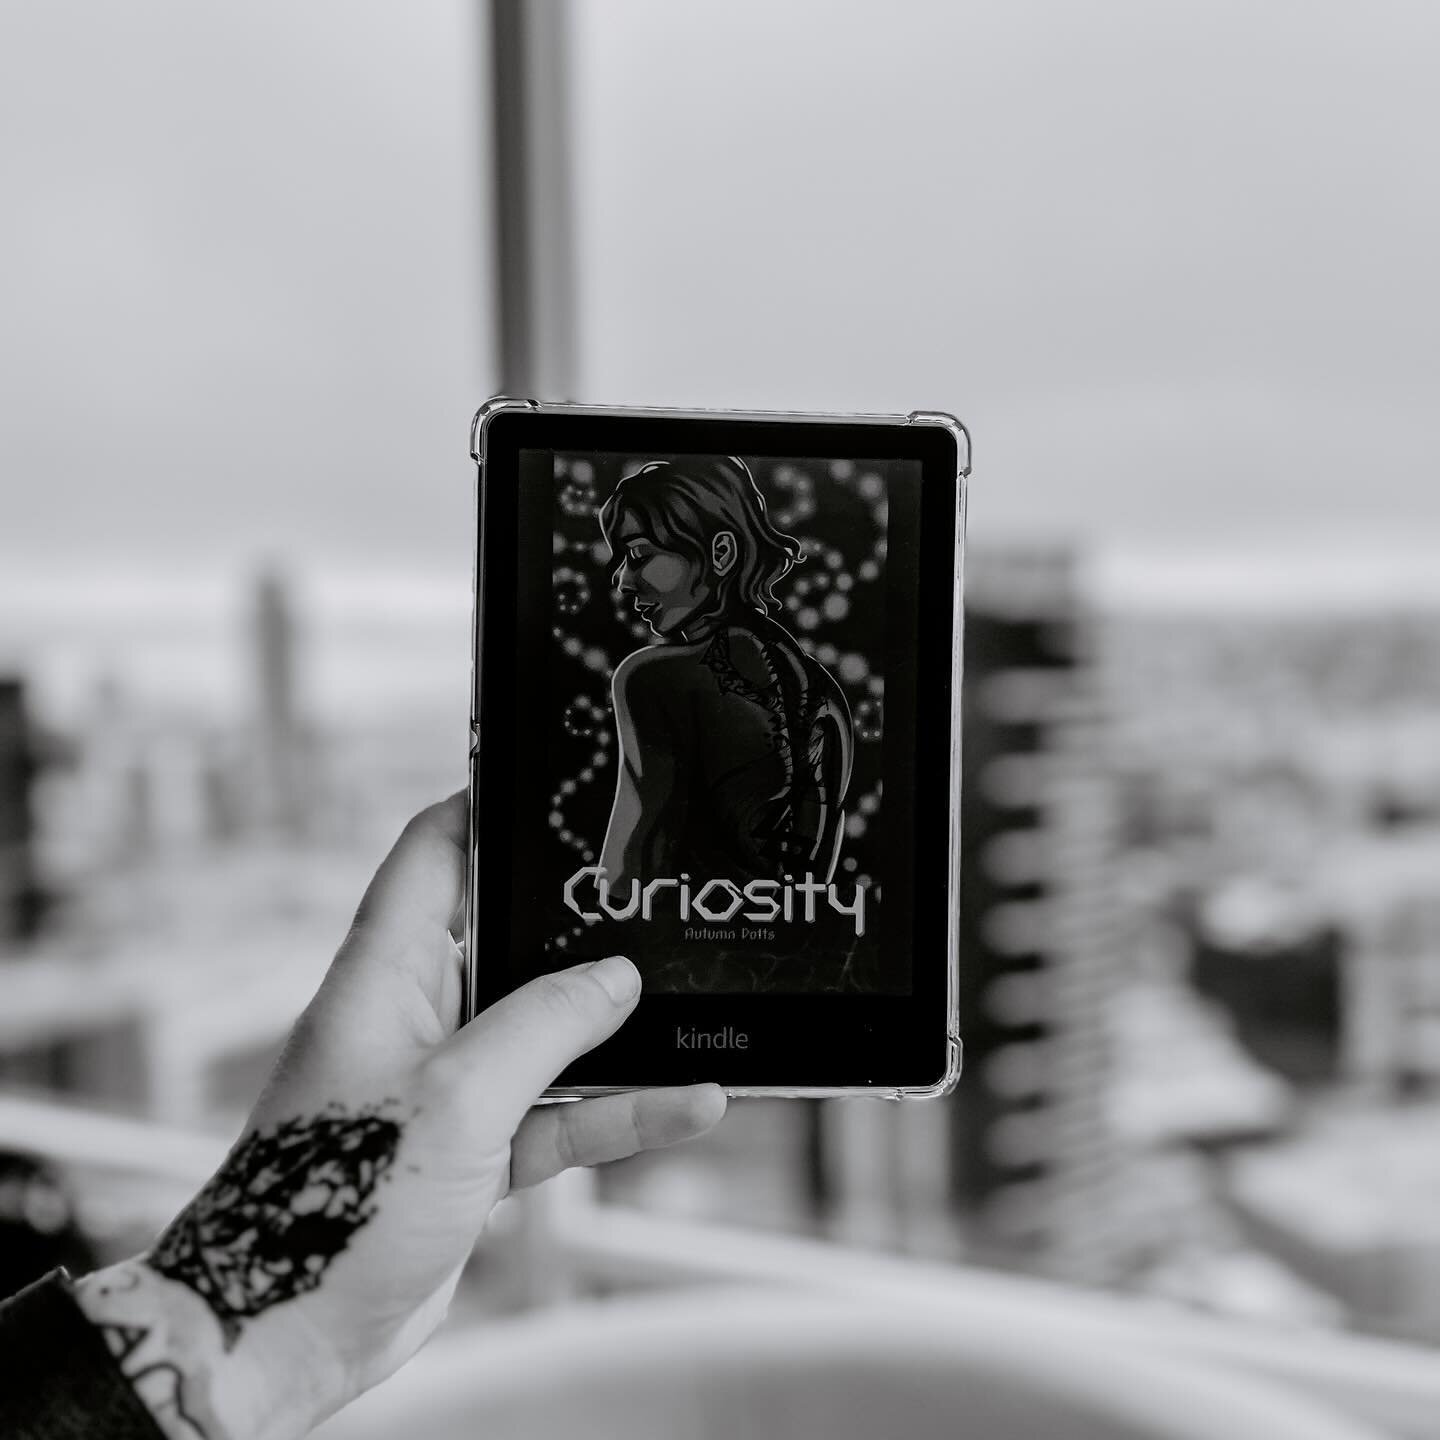 Curiosity by Autumn Potts (⭐️⭐️⭐️⭐️) is a sci-fi fantasy that fulfilled all of my mermaid dreams! Argent, Luna, and Doro (our MCs) are Merrens within the Oceania society, responsible for undertaking emergency responses to crises that happen. Almost i